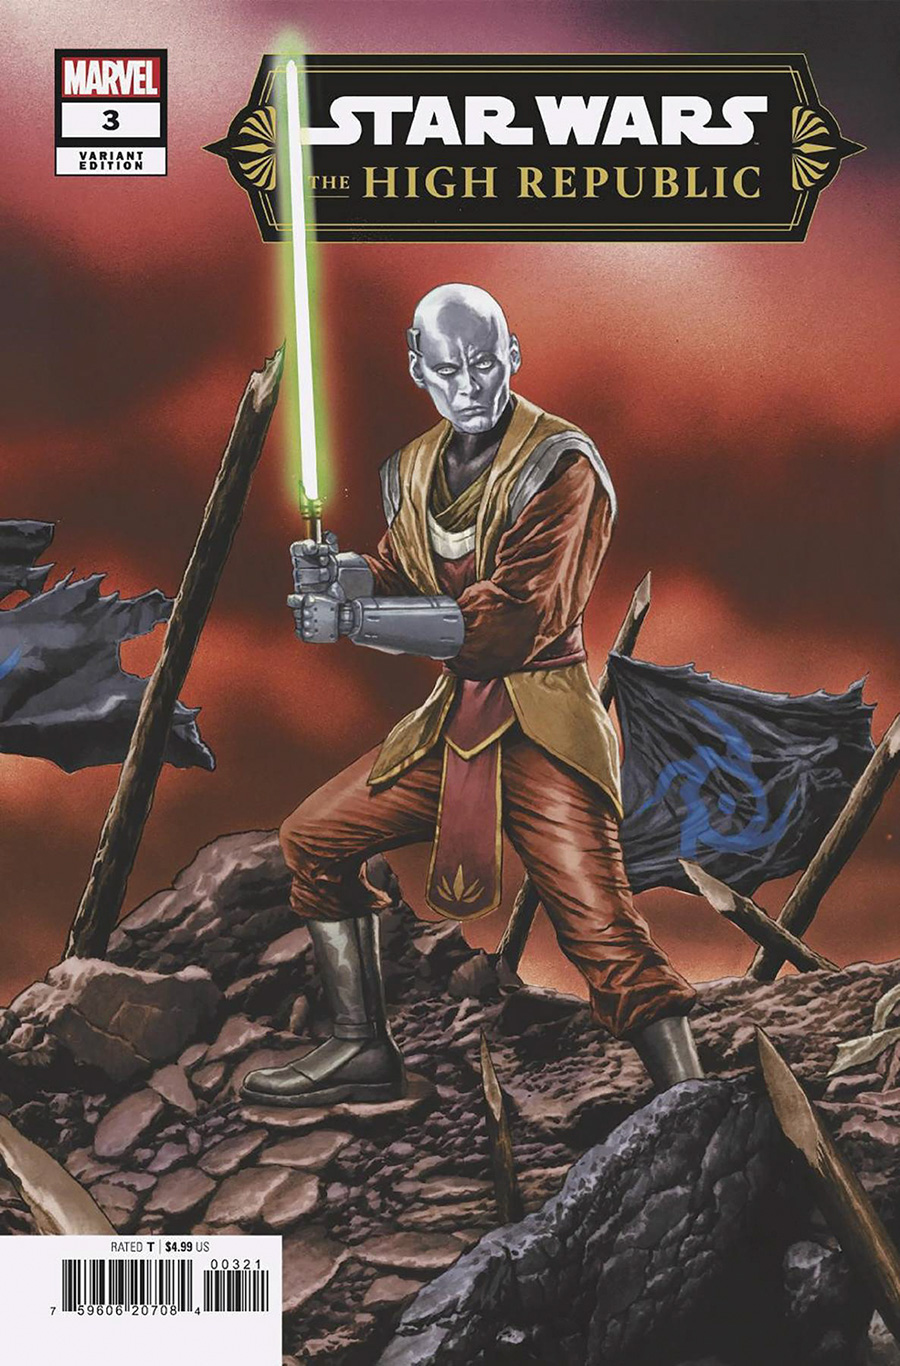 Star Wars The High Republic Vol 3 #3 Cover B Variant Mico Suayan Connecting Cover